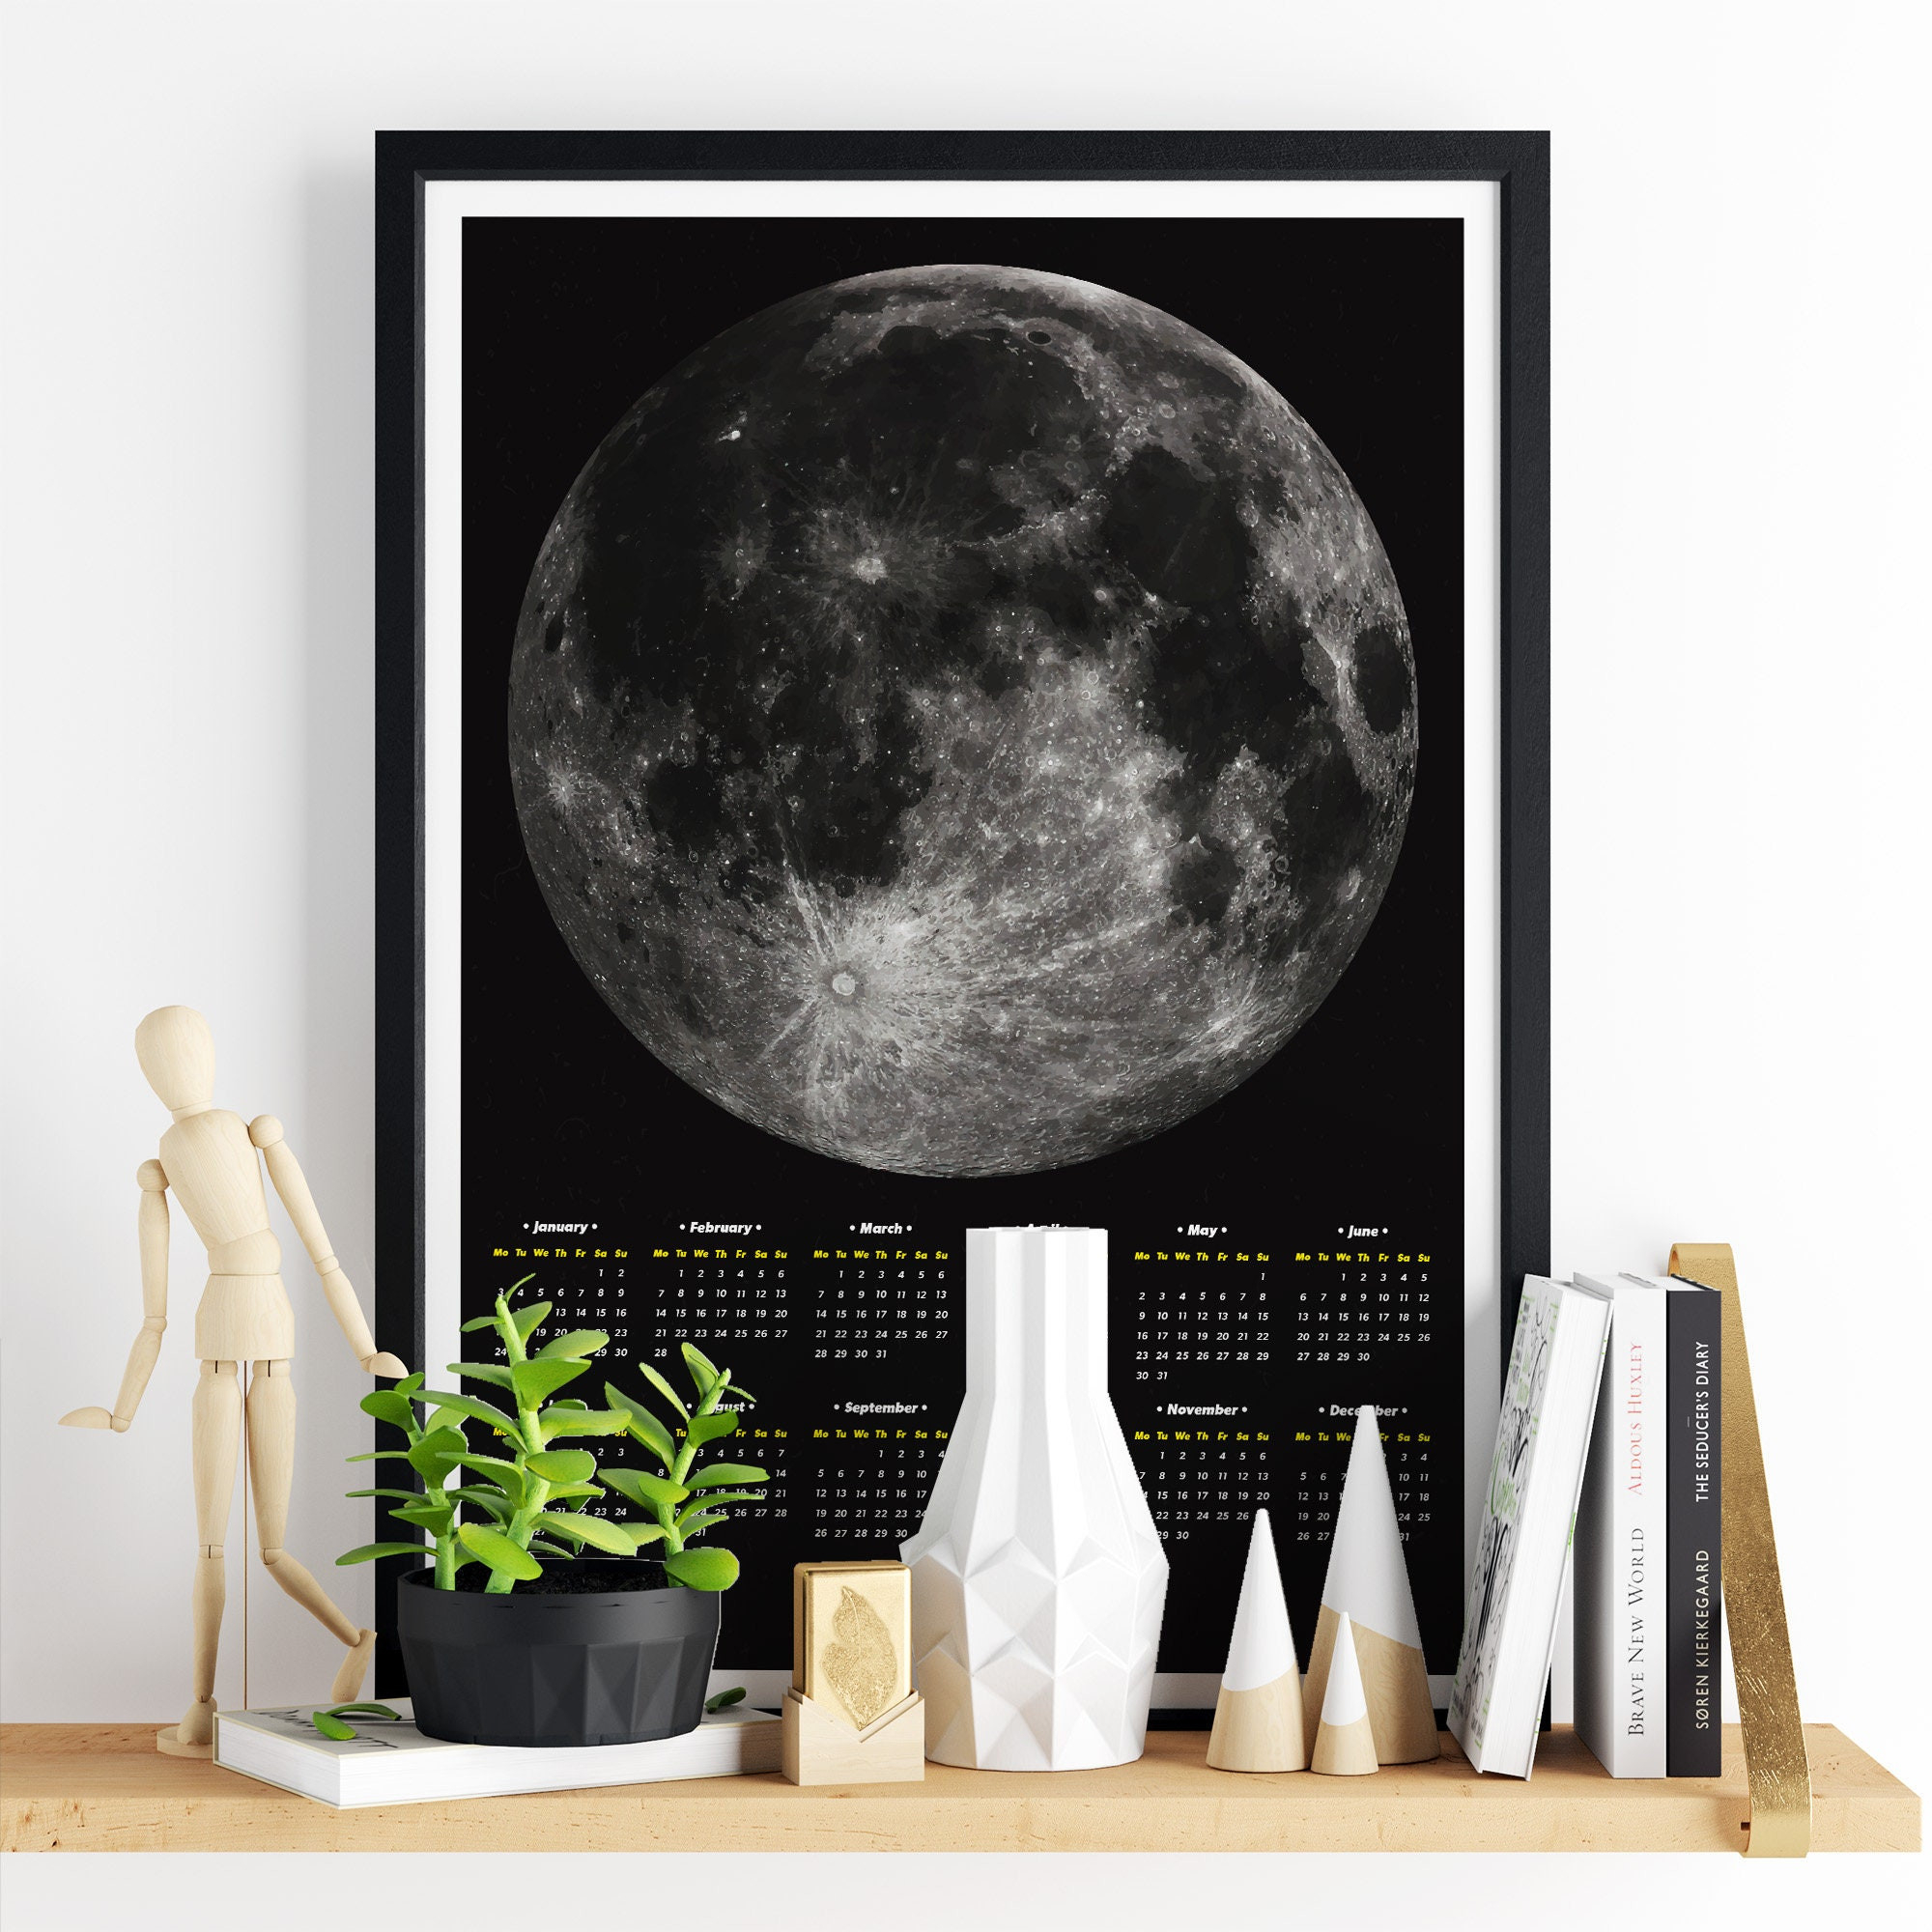 2022 Calendar With Full Moon Unframed At A Glance Yearly  Full Moon Calendar 2022 Montreal